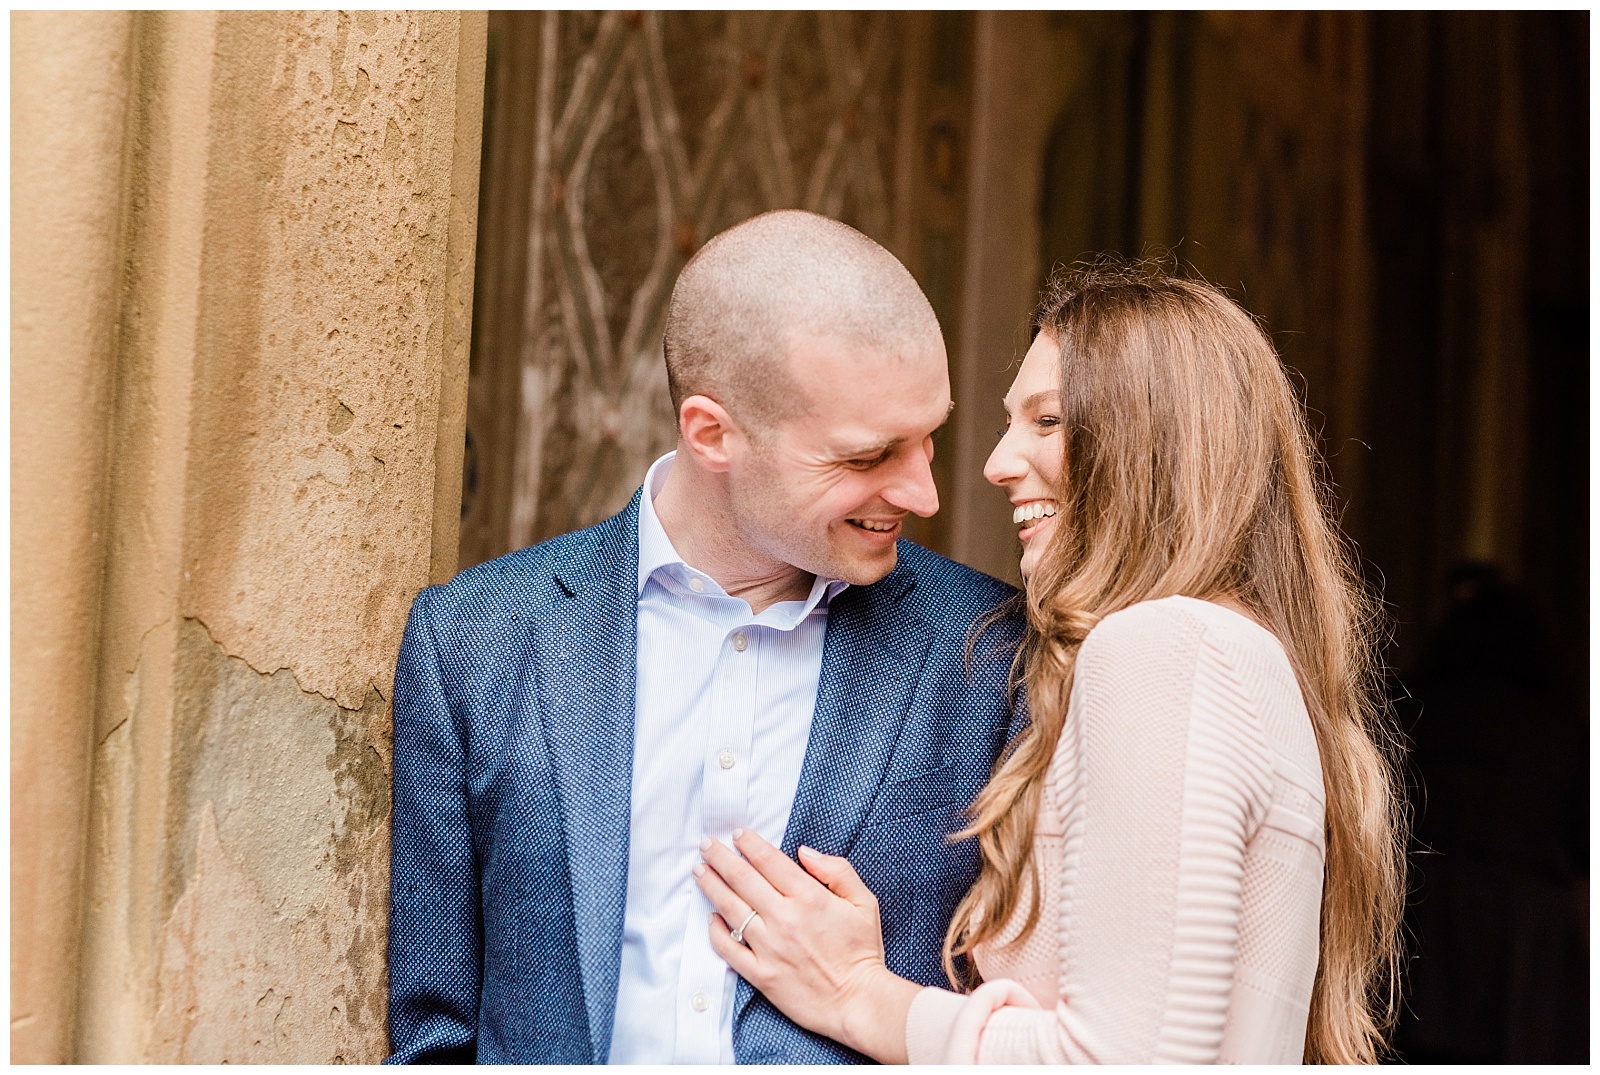 A couple laughs together in the entryway of Bethesda Terrace.